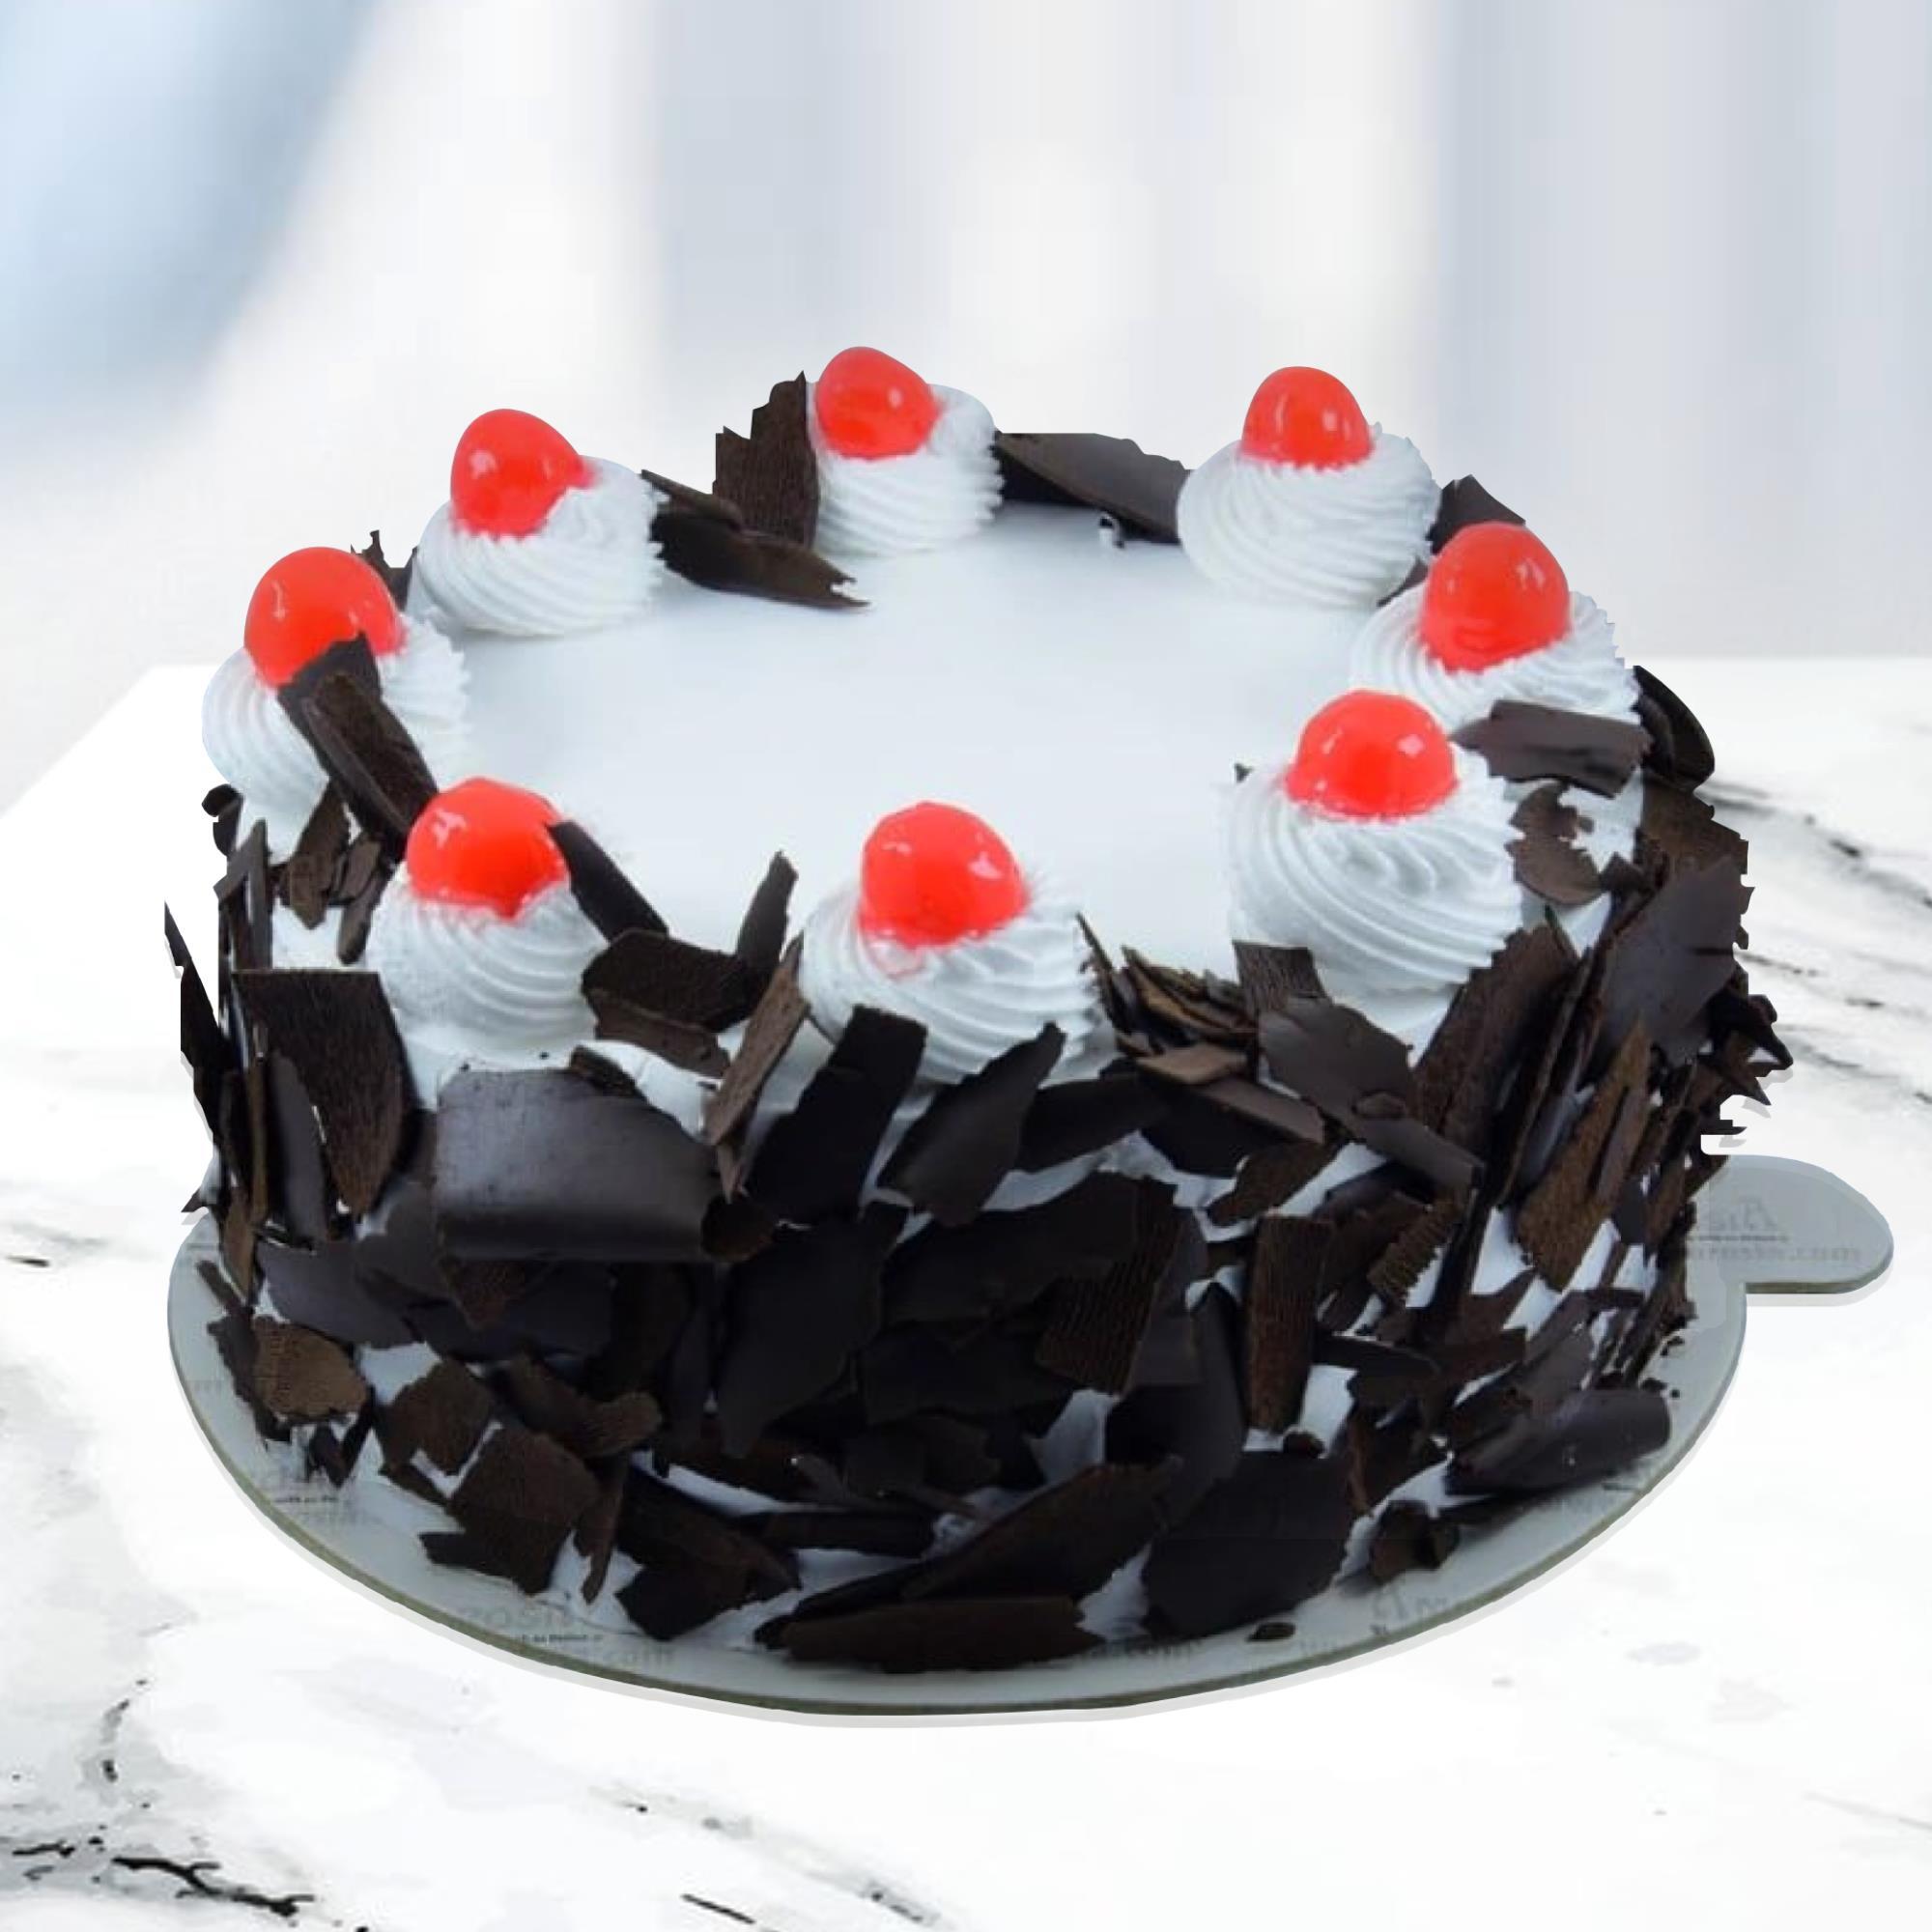 Online Cake Delivery in Bangalore | Order Cakes to Bangalore | Free Shipping